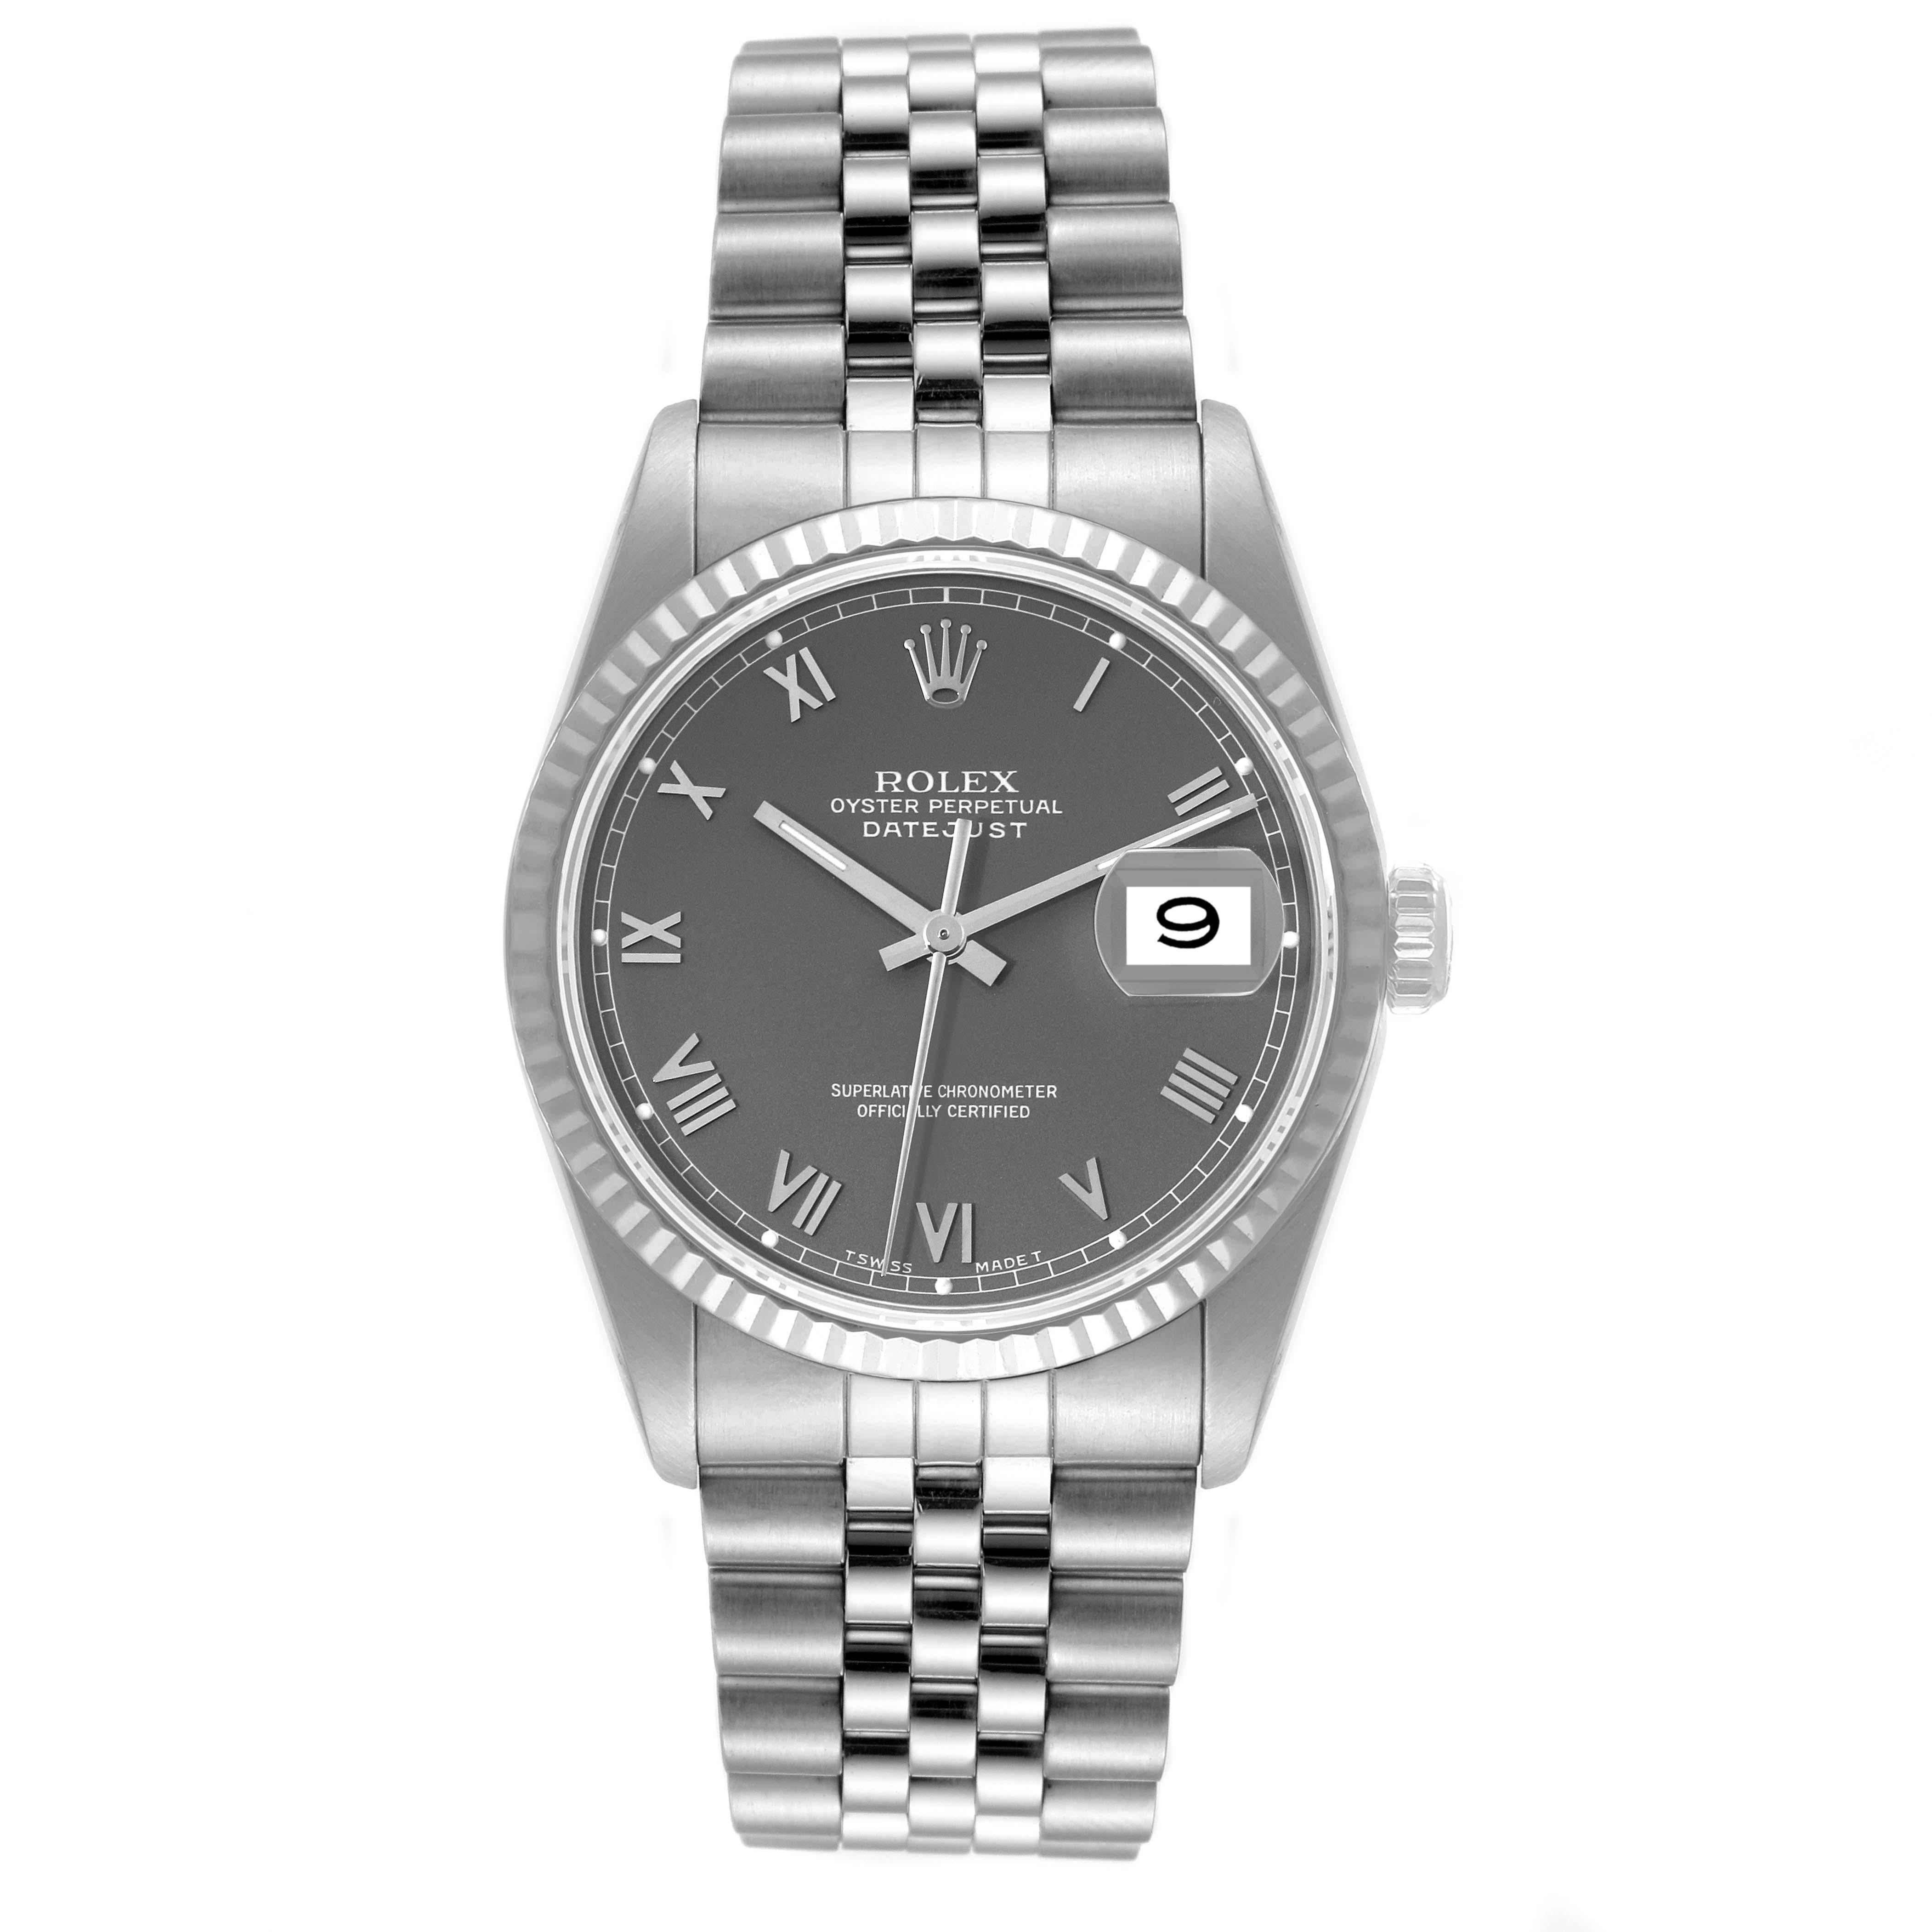 Rolex Datejust Steel White Gold Grey Roman Dial Mens Watch 16234. Officially certified chronometer automatic self-winding movement. Stainless steel oyster case 36 mm in diameter. Rolex logo on the crown. 18k white gold fluted bezel. Scratch